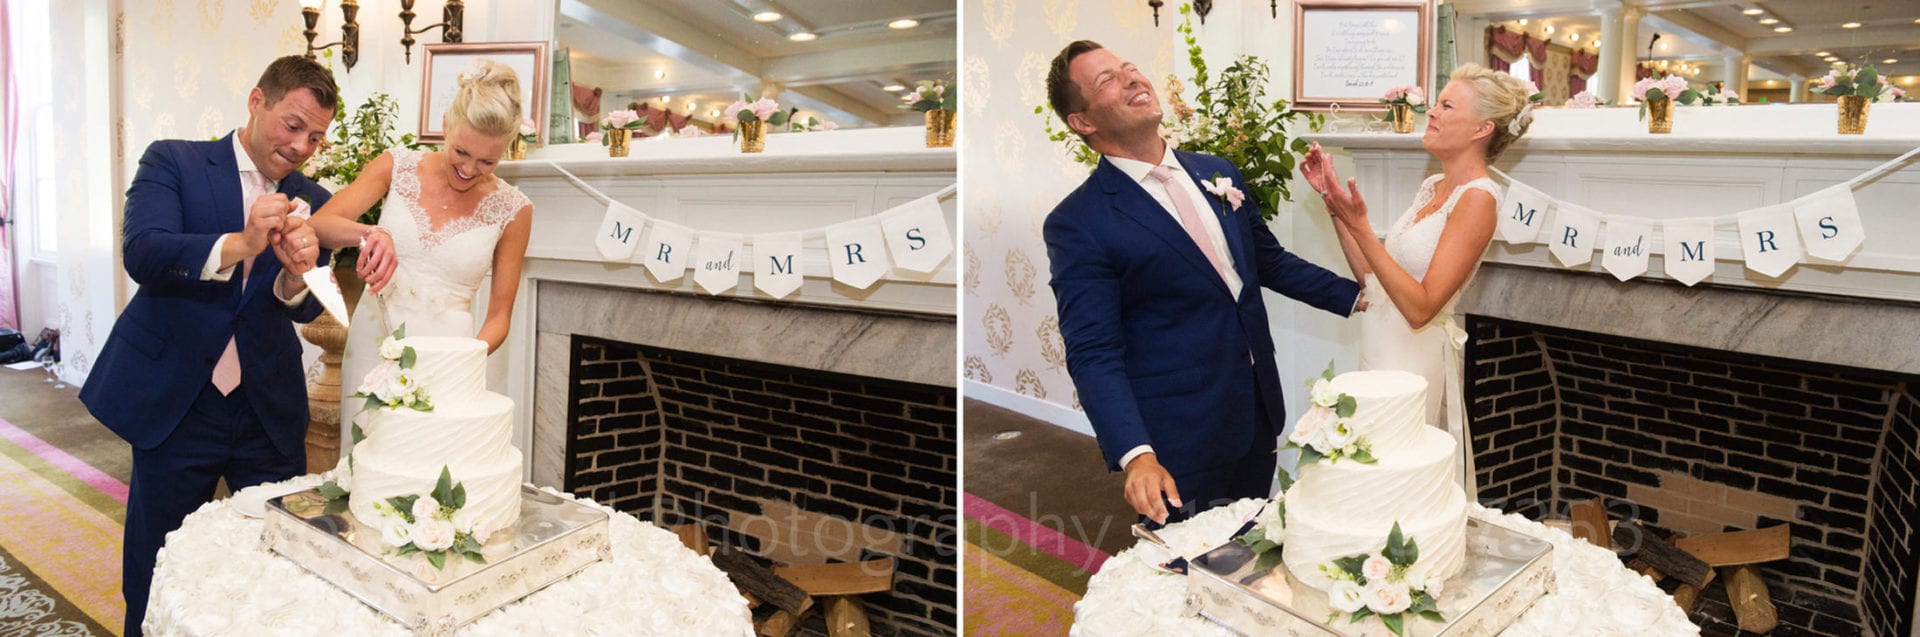 Bride and groom clown around as they cut their wedding cake in front of a fireplace with a Mr. and Mrs. banner attached to it during their Omni Bedford Springs Resort Wedding.